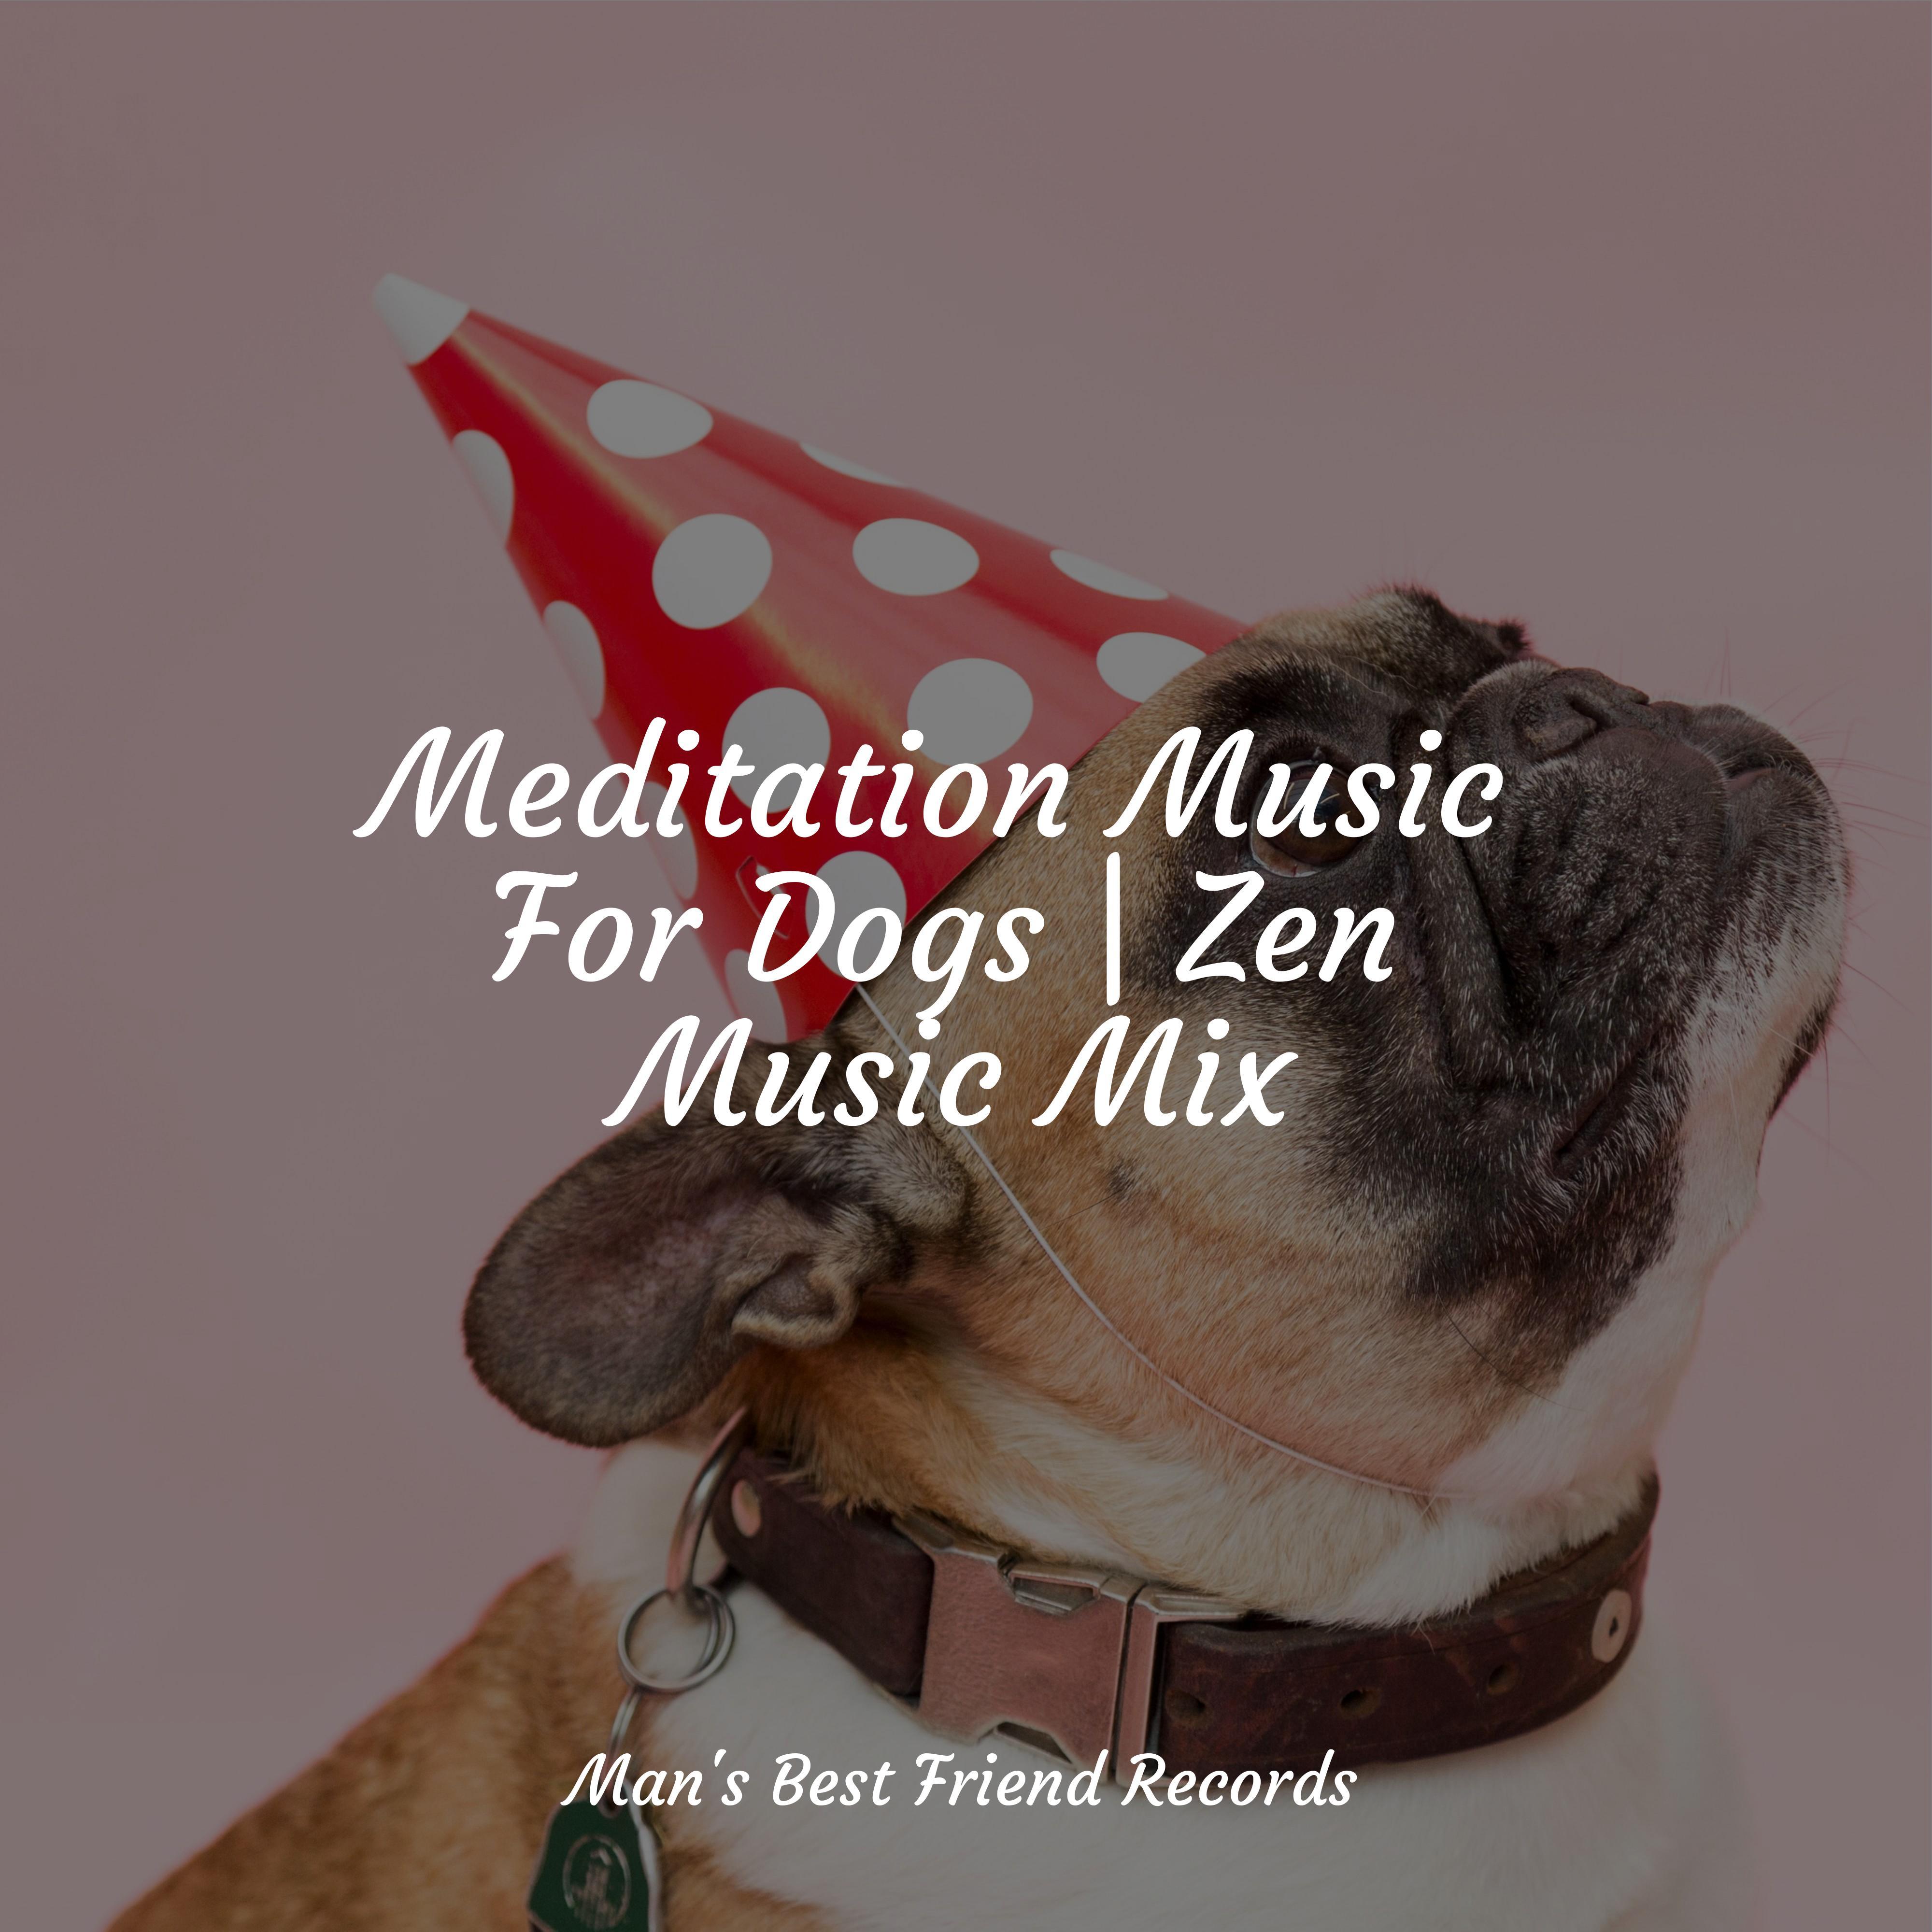 Relaxation Music For Dogs - Stress Free Sounds